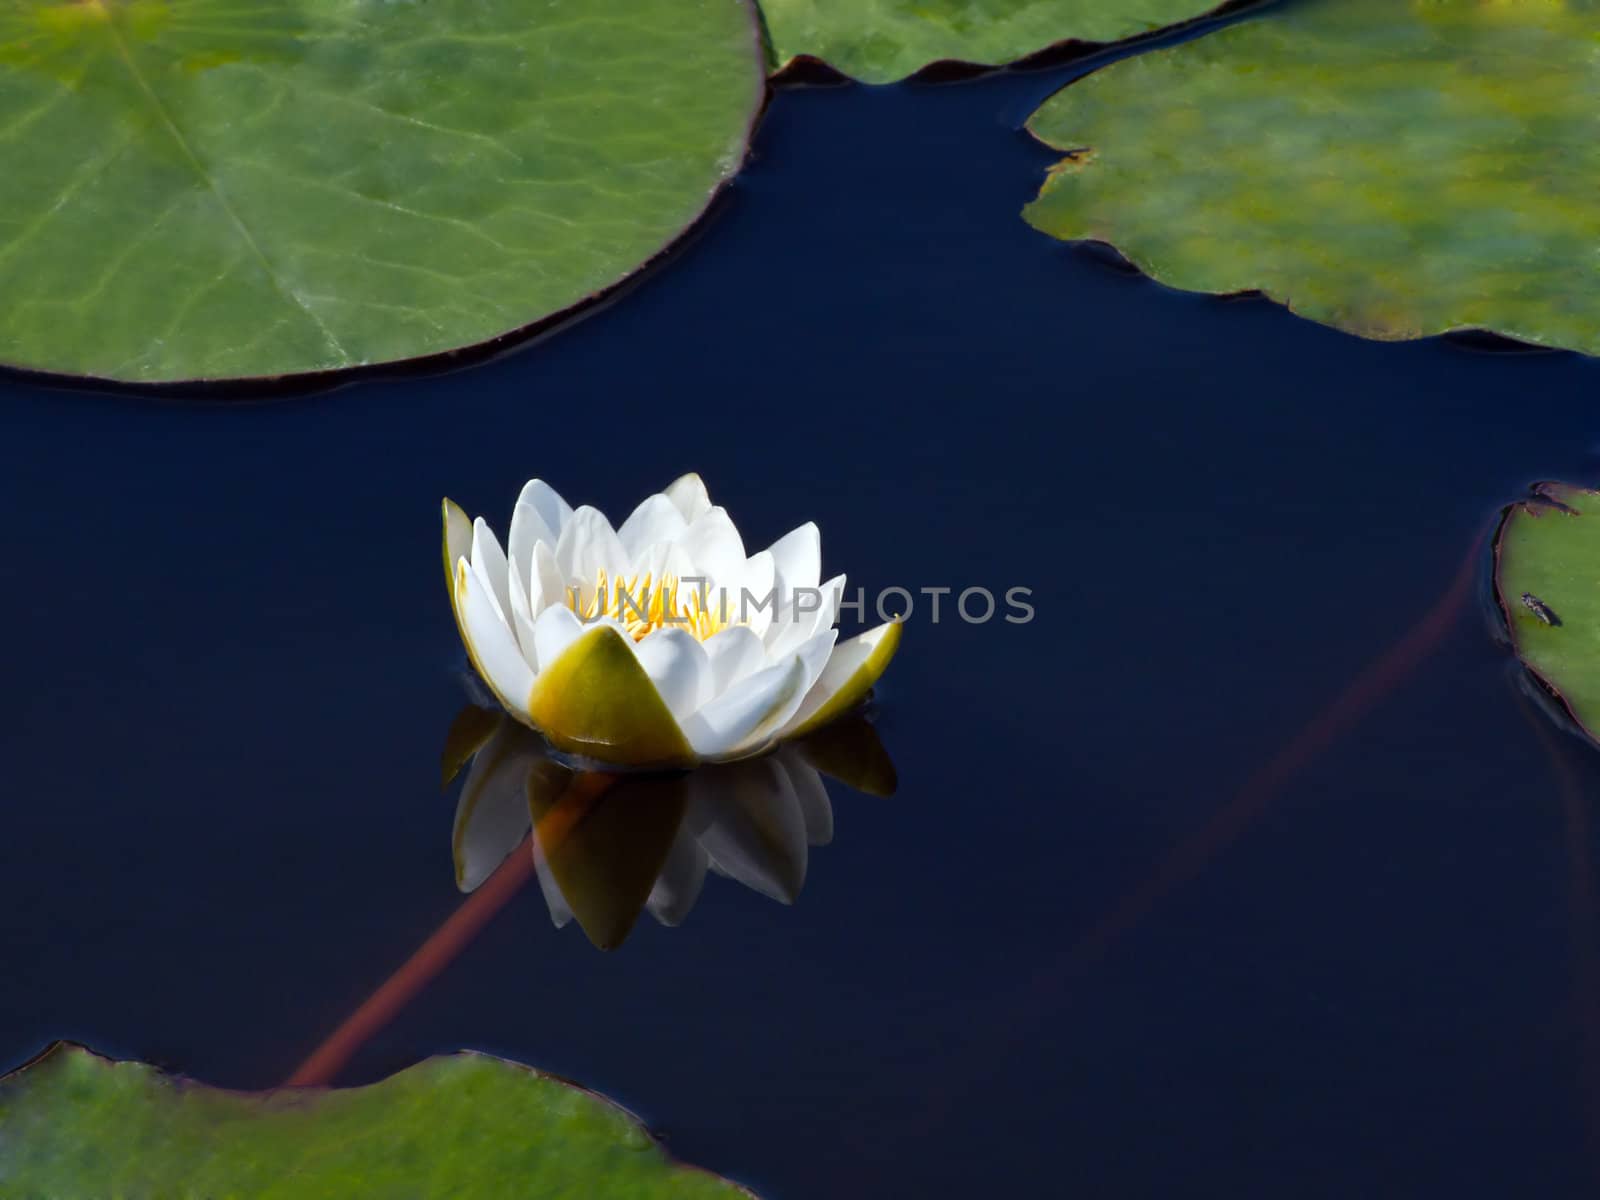 White water lily in a dark pond, a white lotus